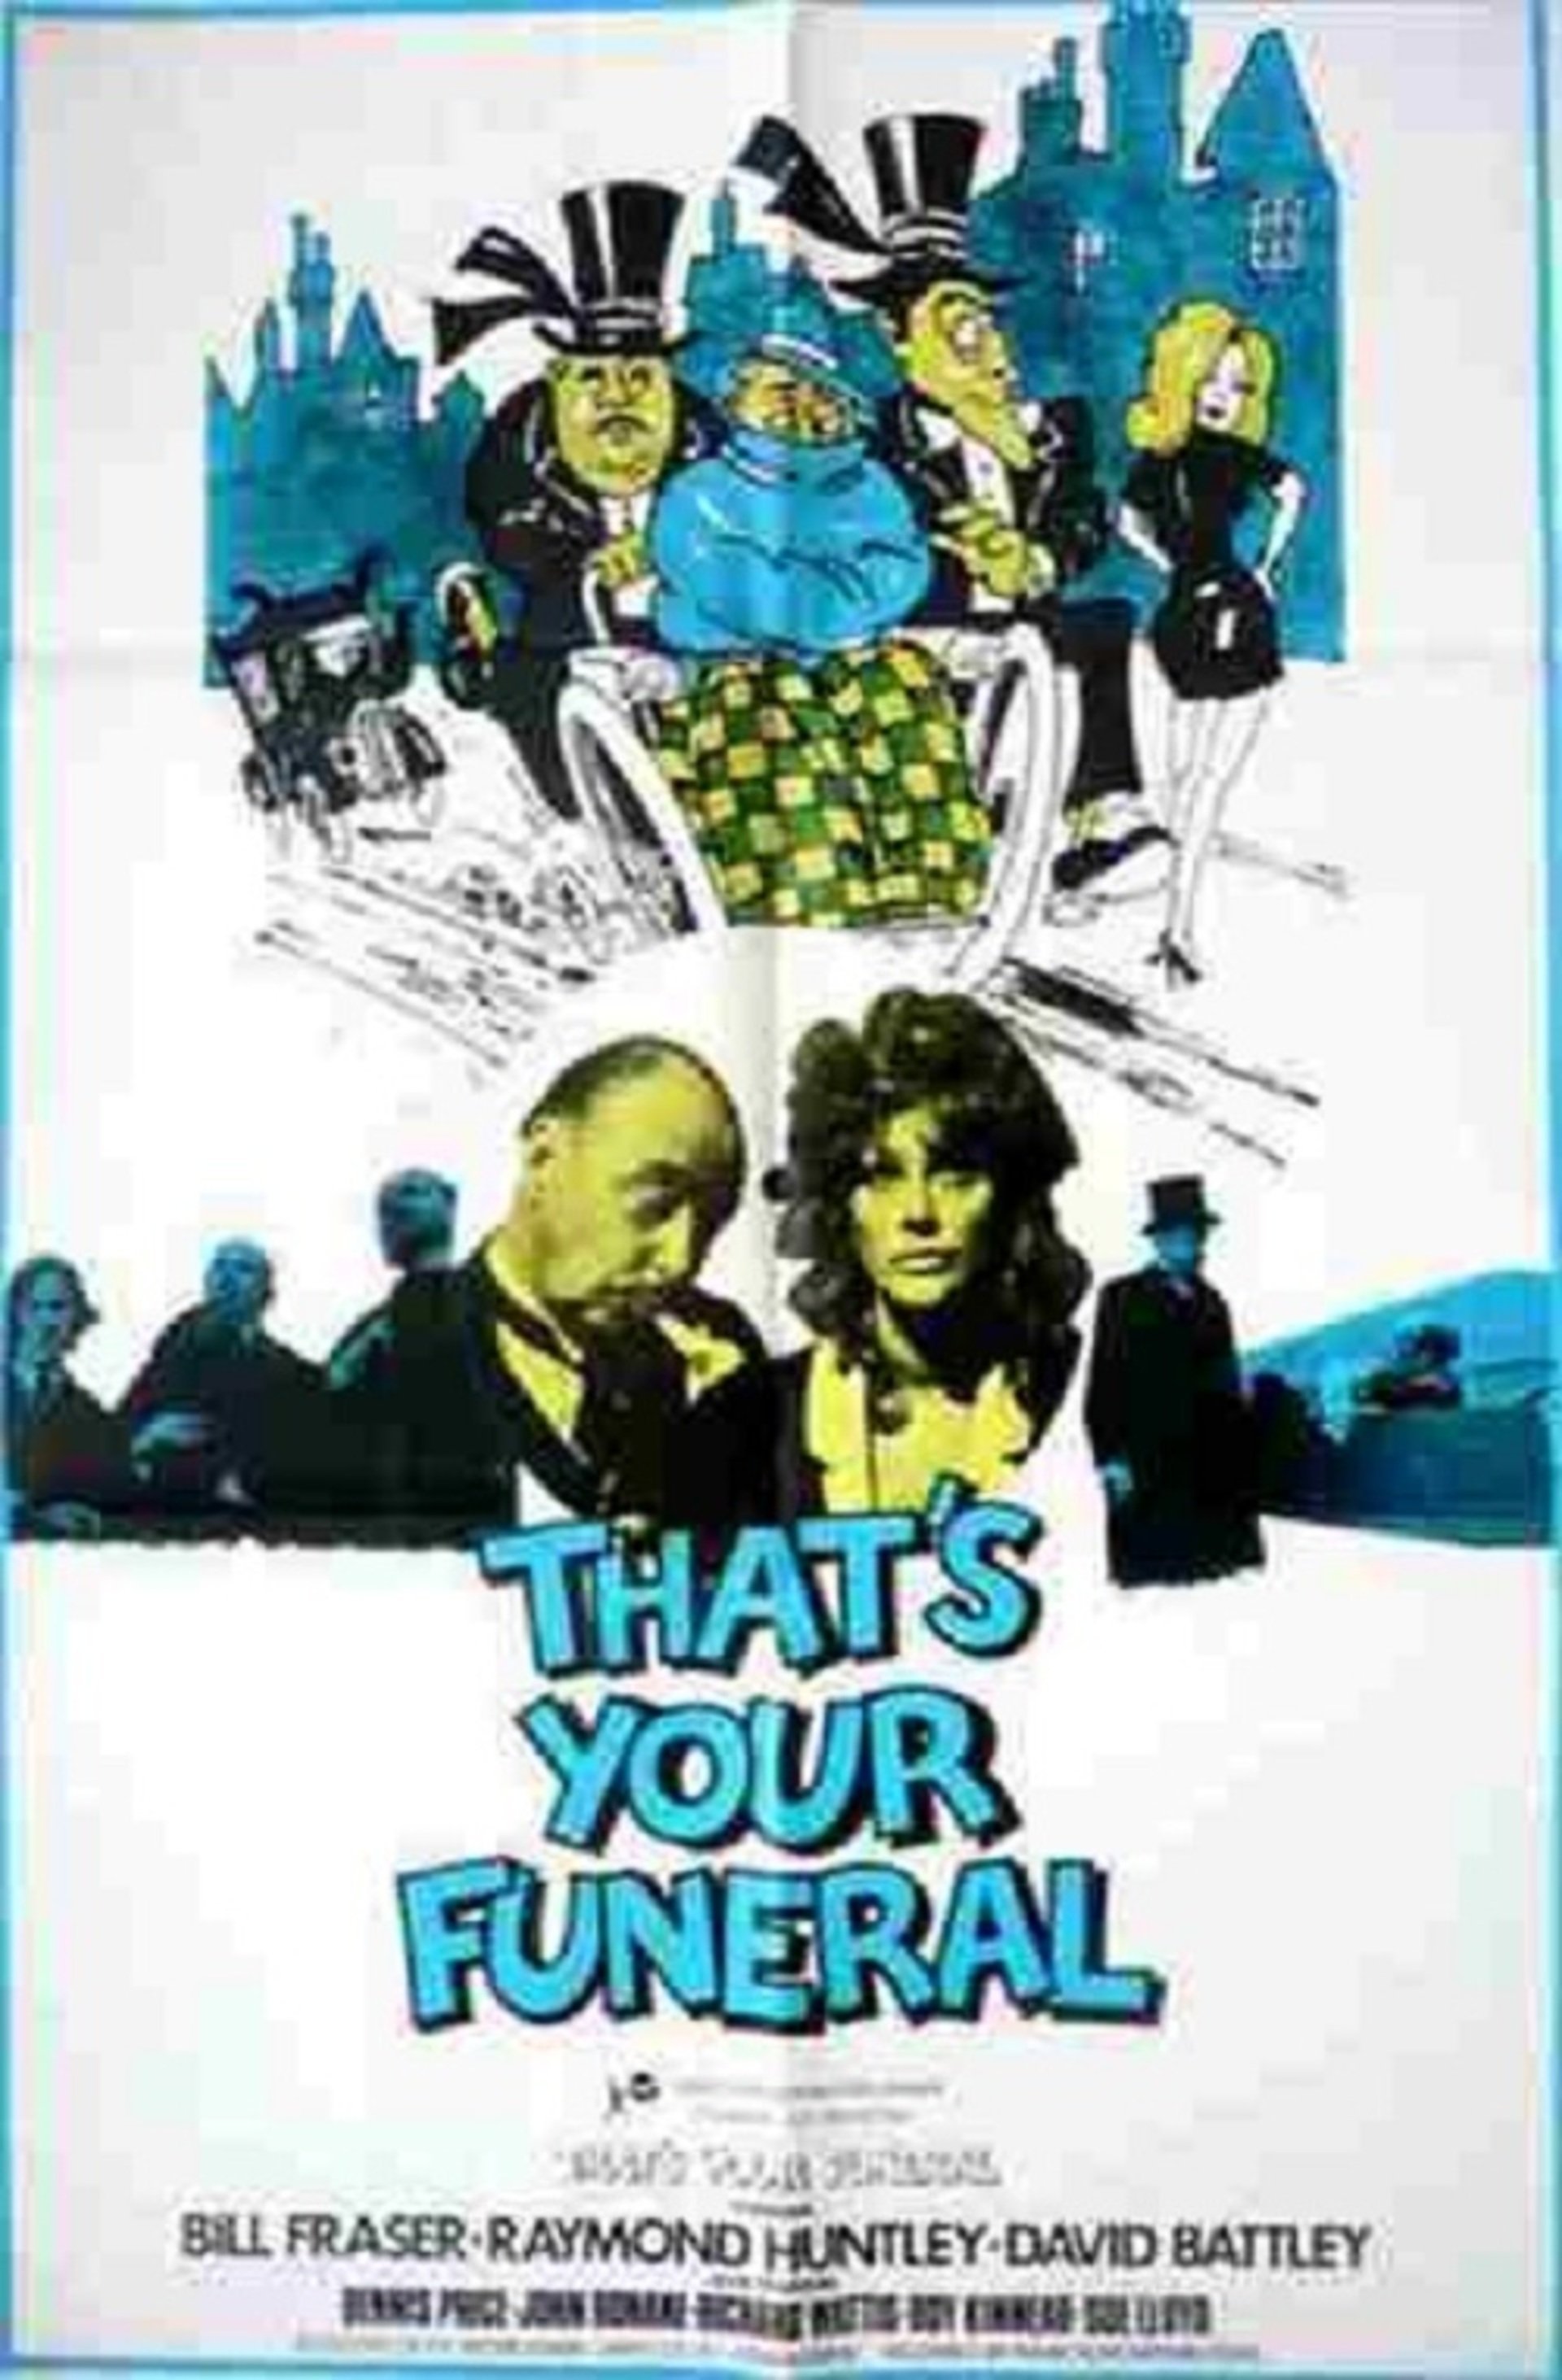 That's Your Funeral (1972) Screenshot 4 